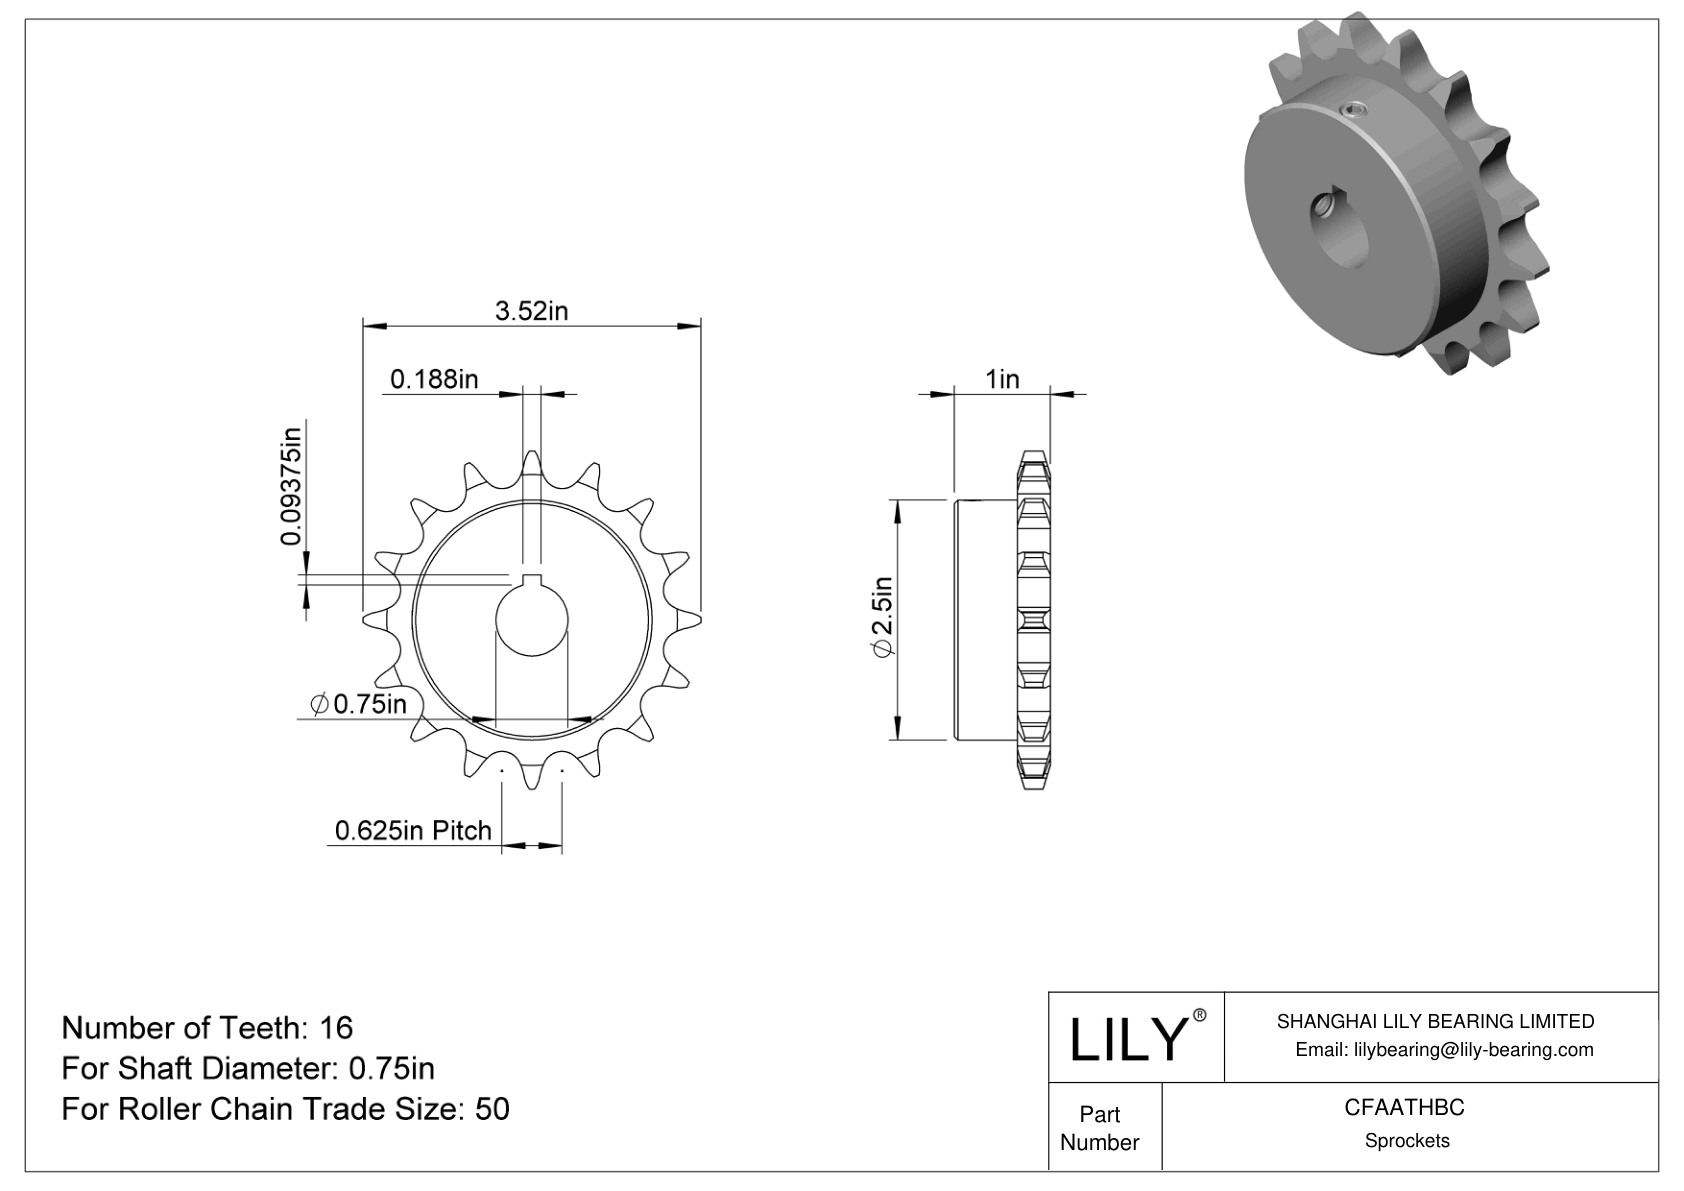 CFAATHBC Wear-Resistant Sprockets for ANSI Roller Chain cad drawing